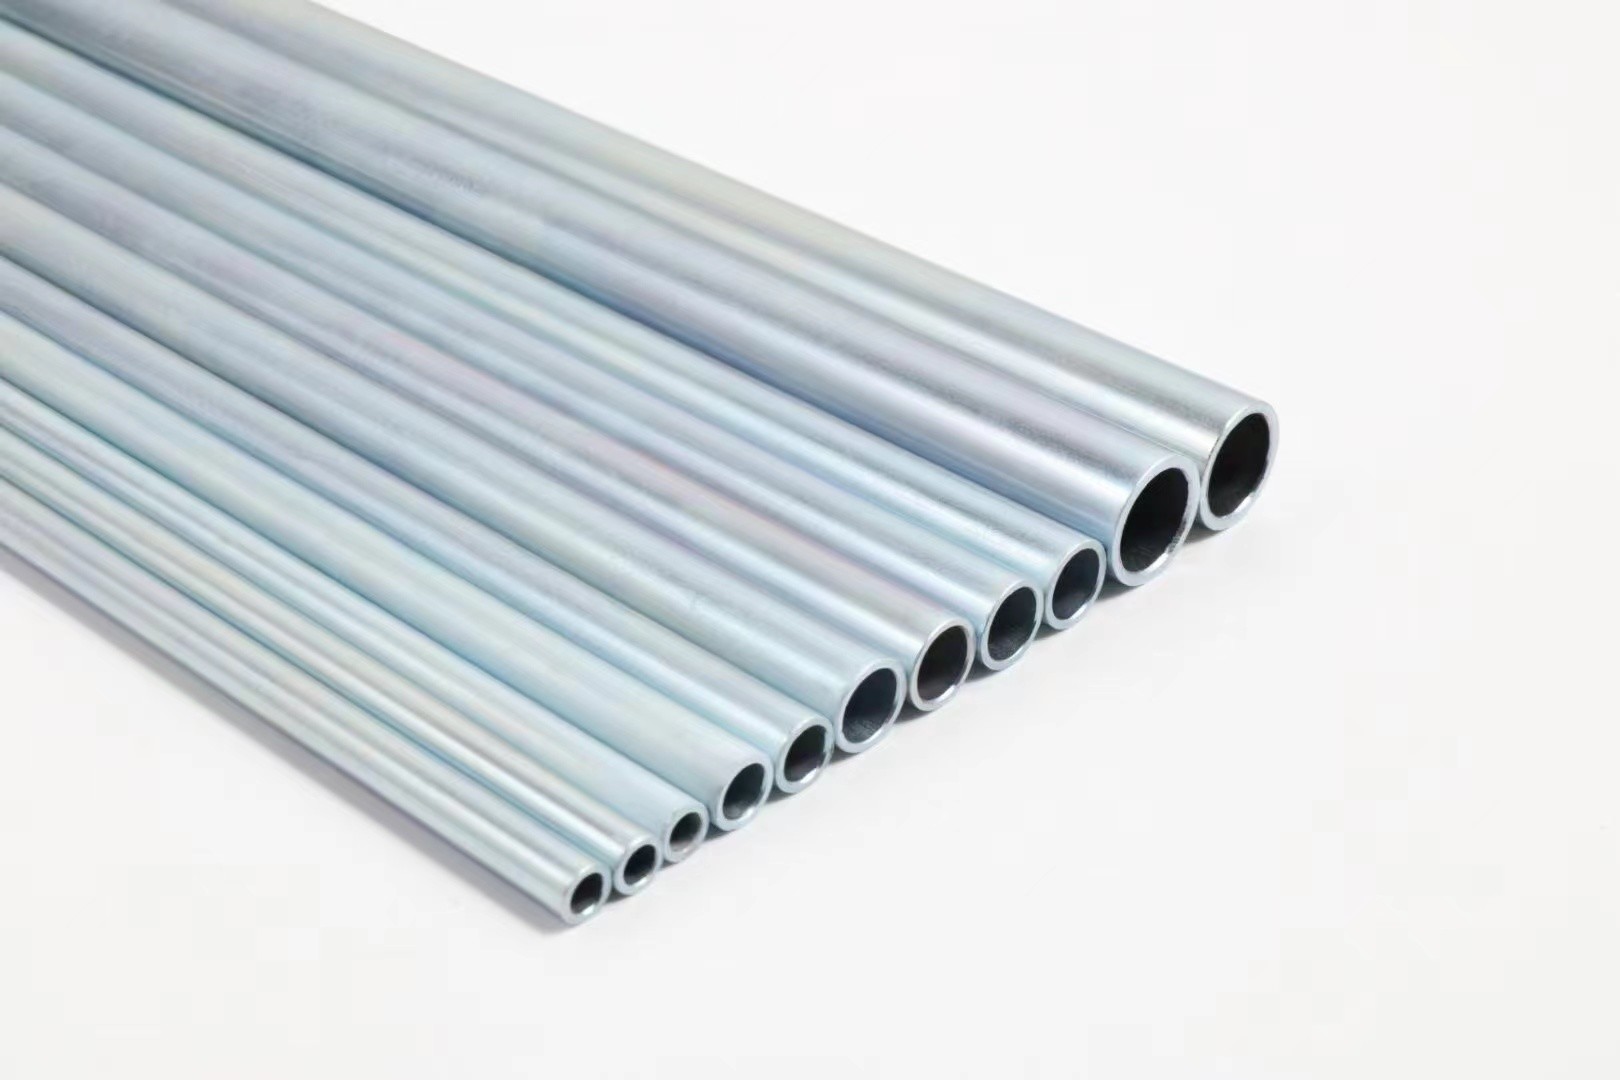 Buy cheap ASTM A213 A199 Seamless Precision Steel Pipe Hydraulic Casing Welded Carbon from wholesalers